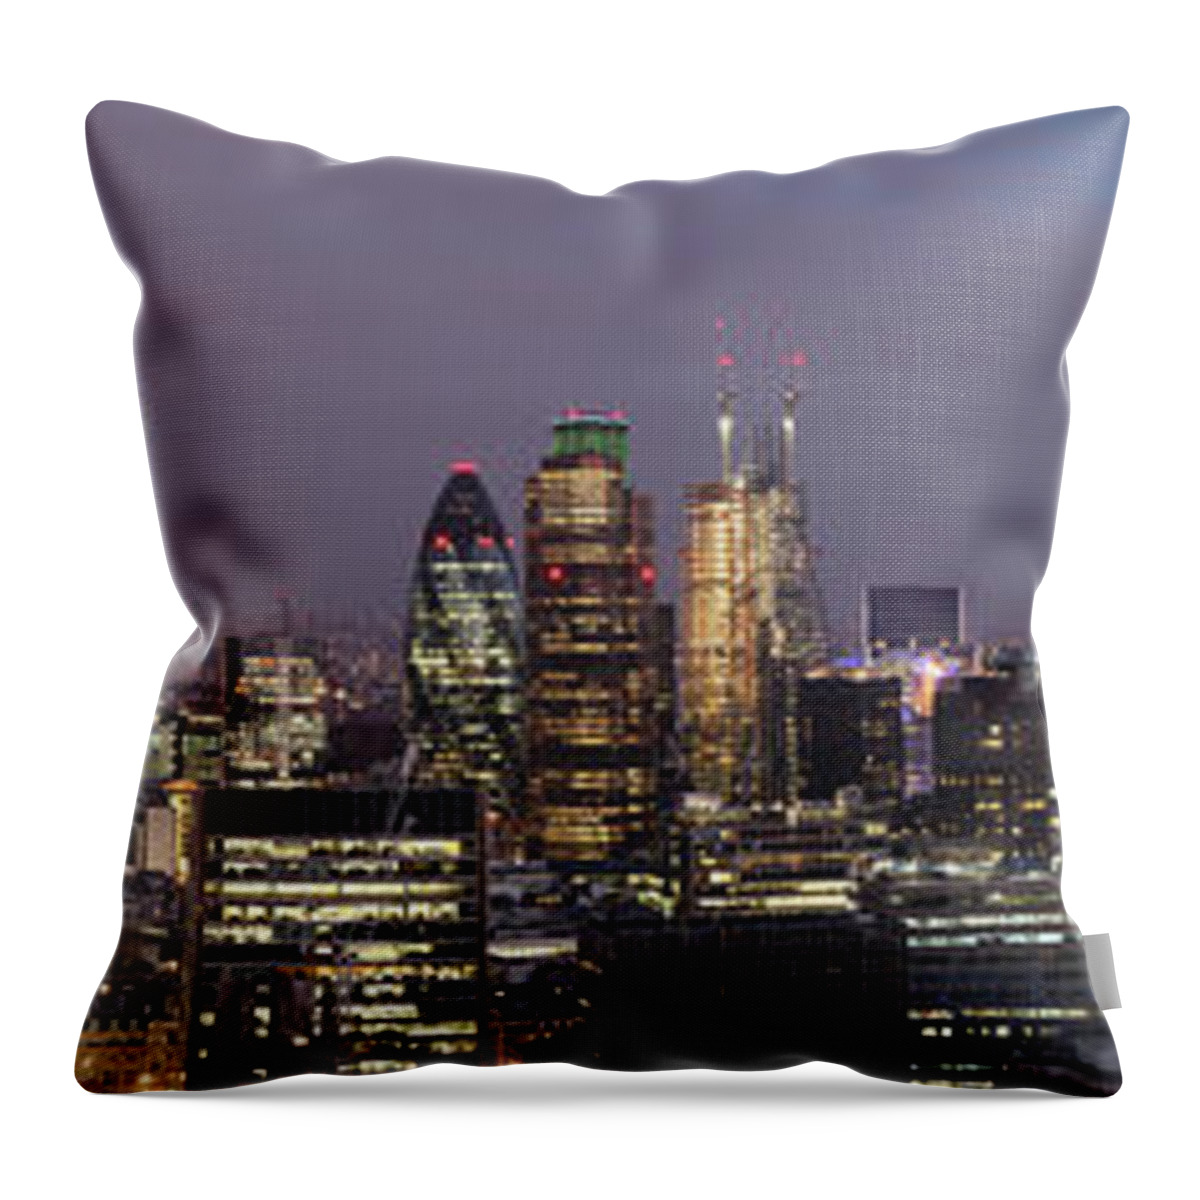 Tranquility Throw Pillow featuring the photograph City Of London #1 by David Bank